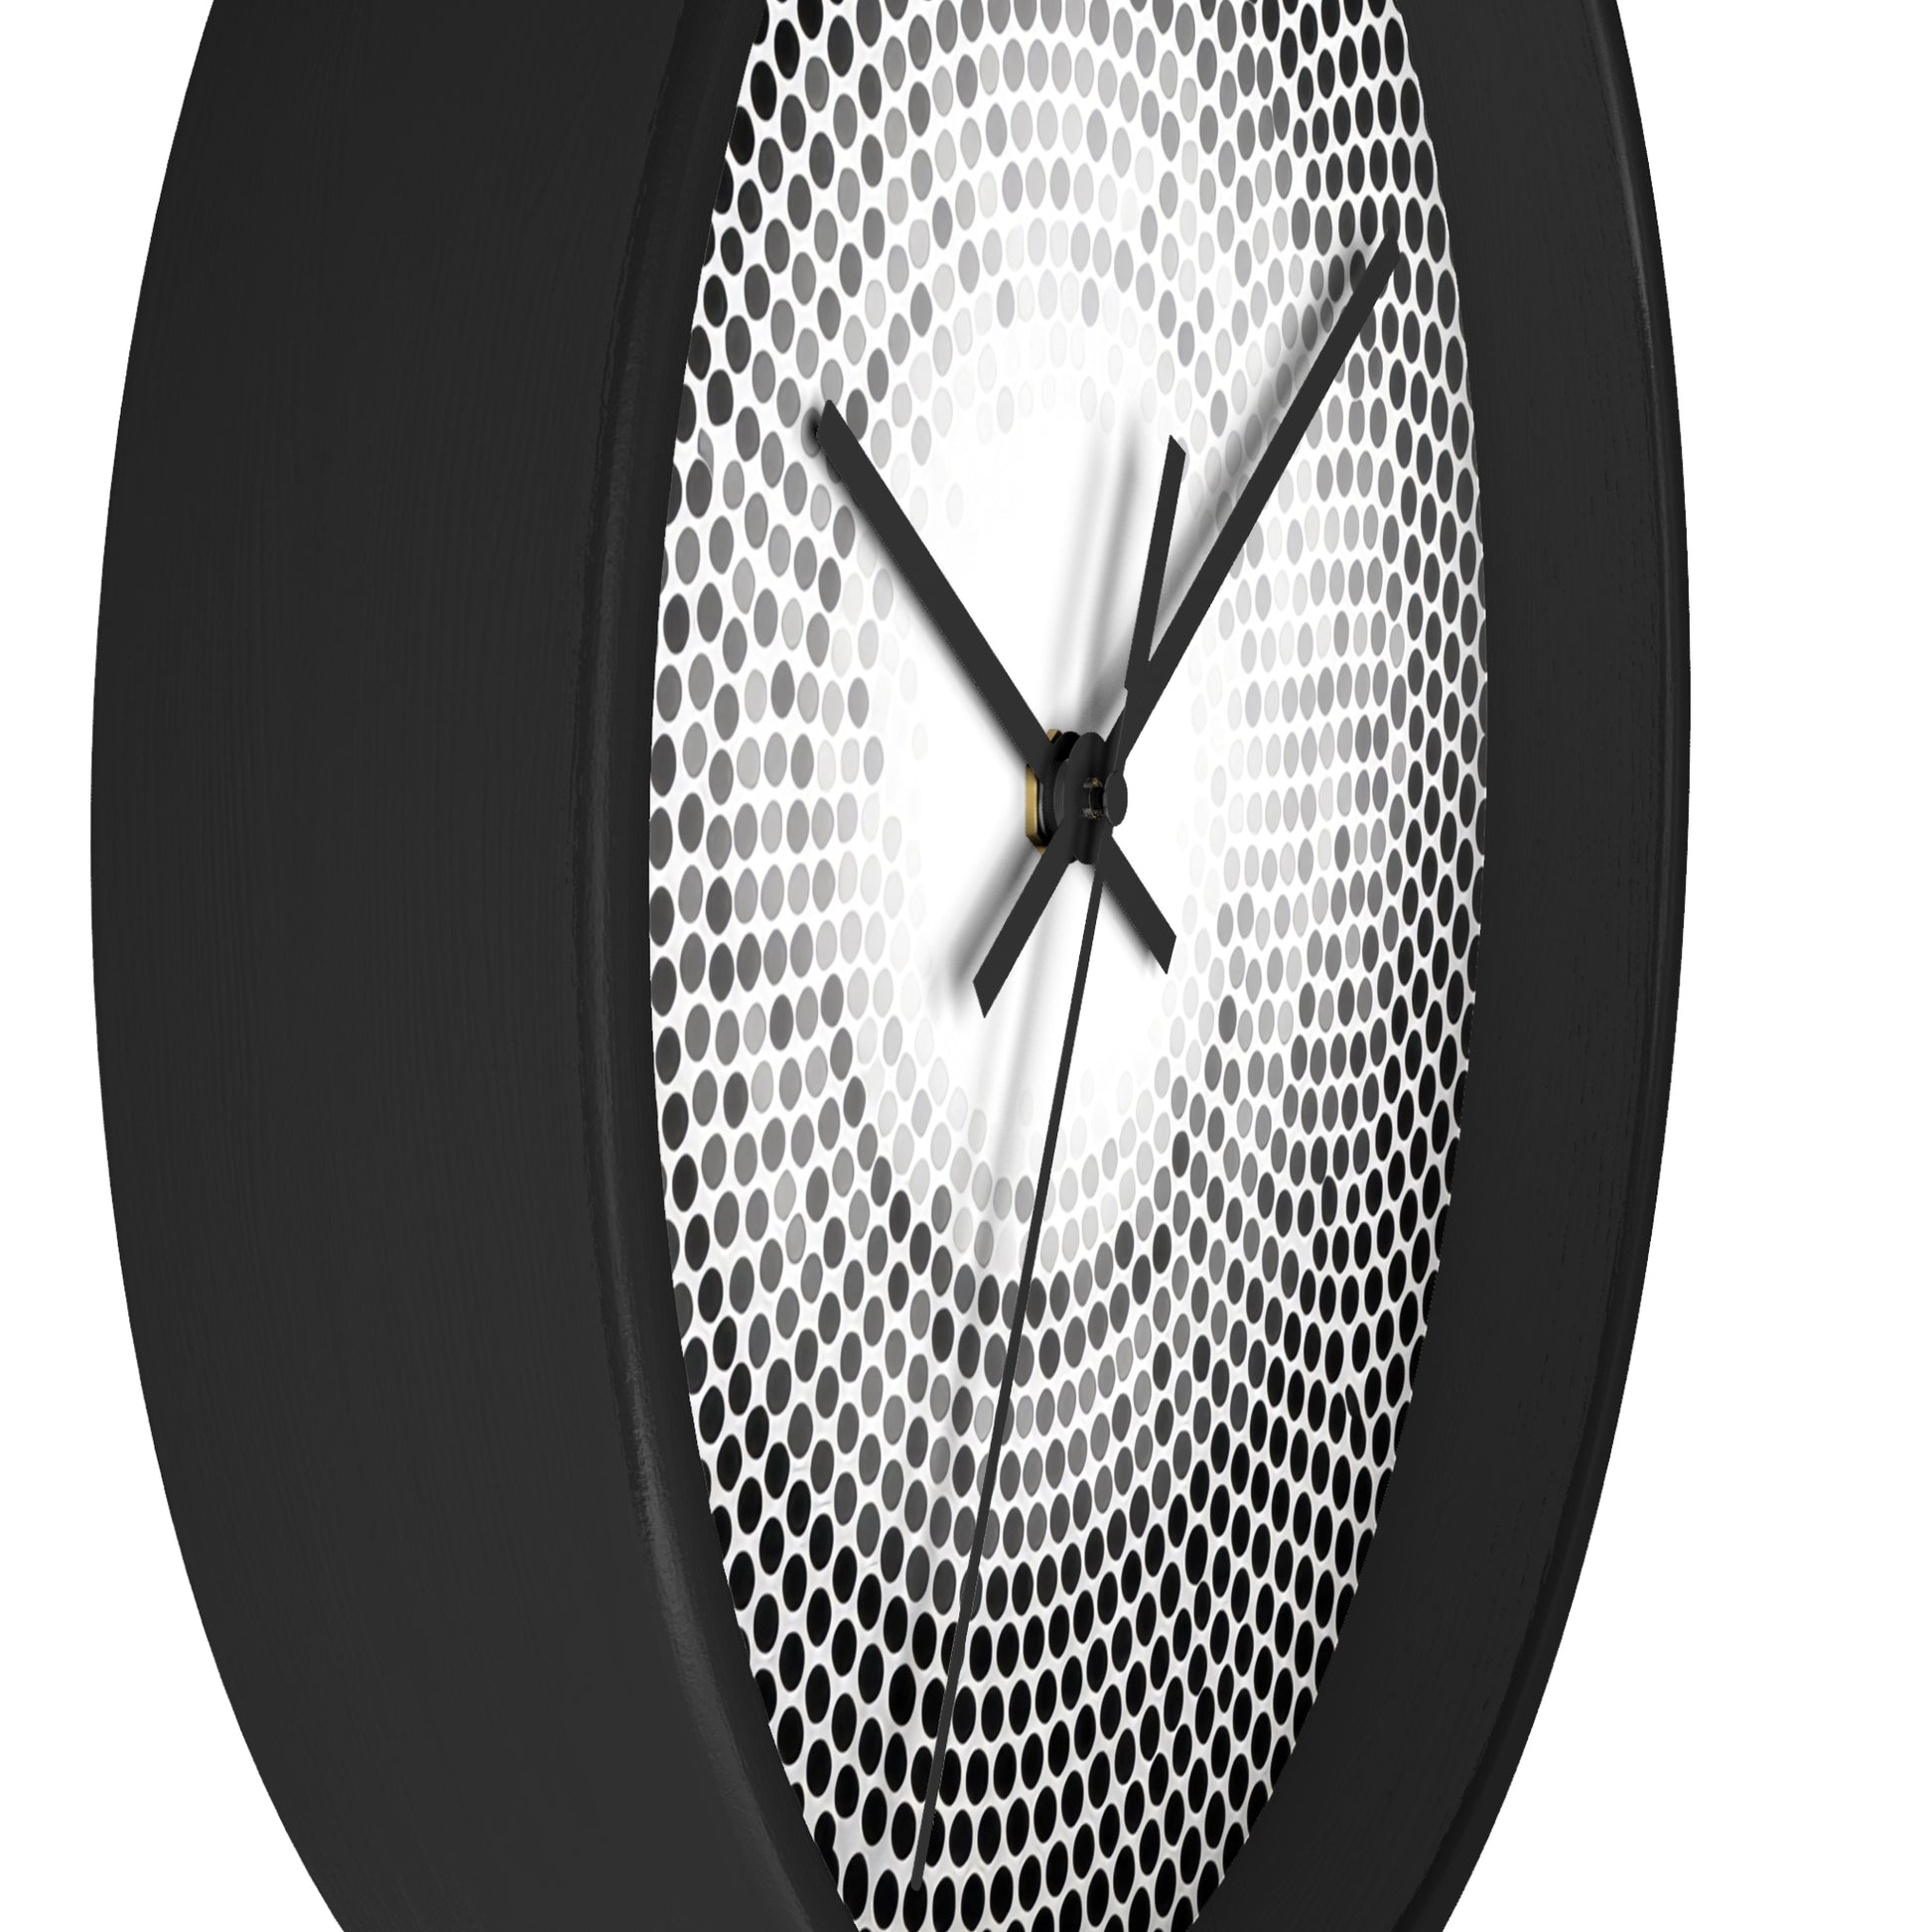 Modern Spiral Nebula Design Wall Clock, a cosmic-inspired timepiece perfect for contemporary design wall clock enthusiasts, featuring unique galaxy embellishments and precision time-telling features for chic home accessories.